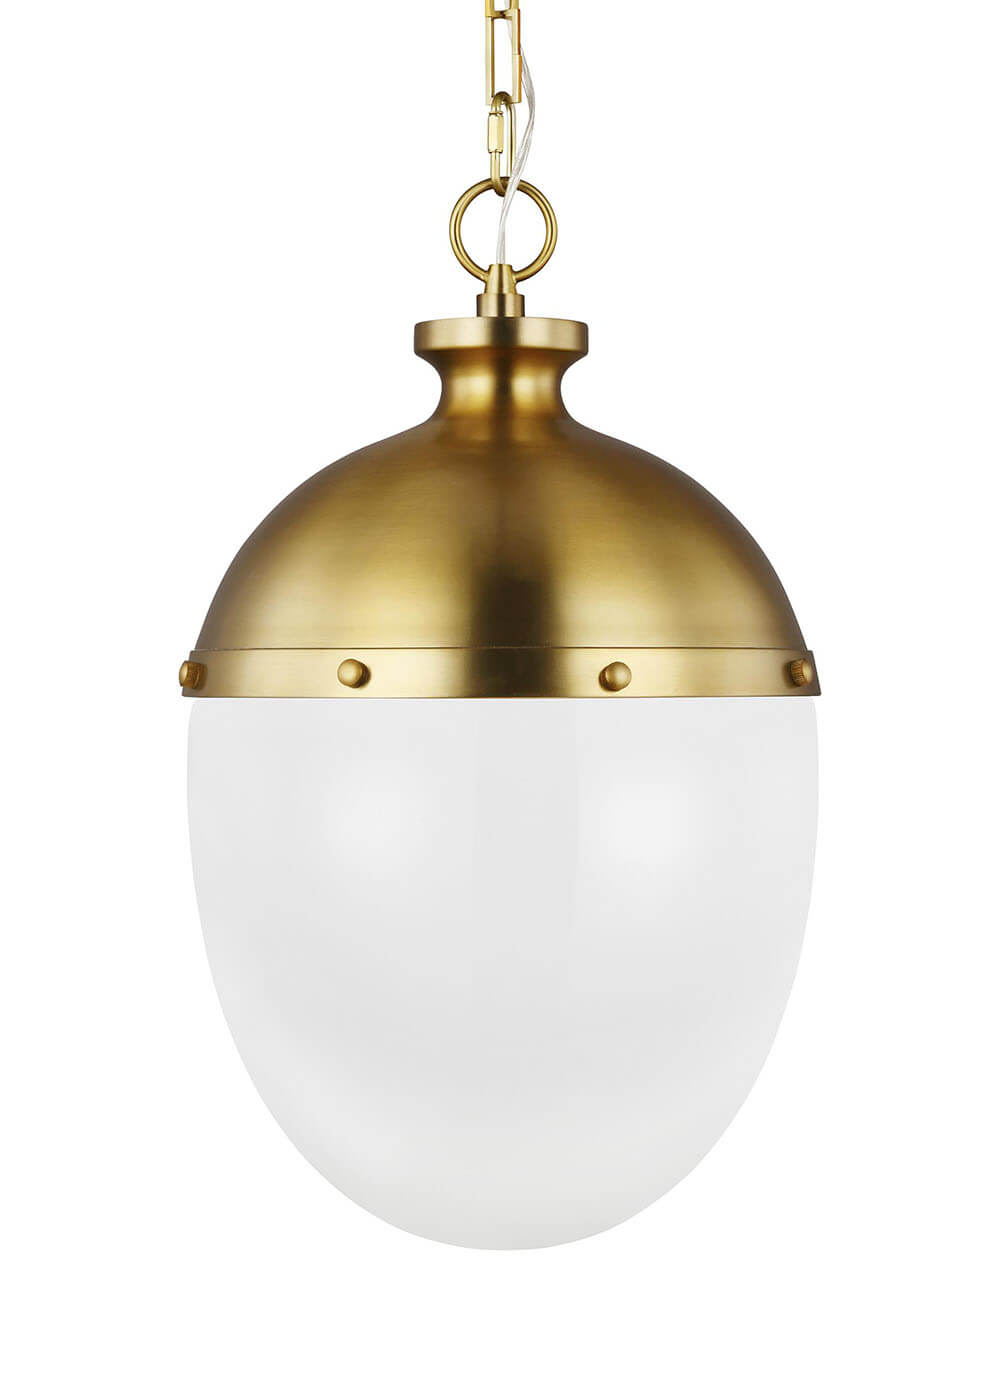 Oblong glass kitchen pendant with a burnished brass finish.